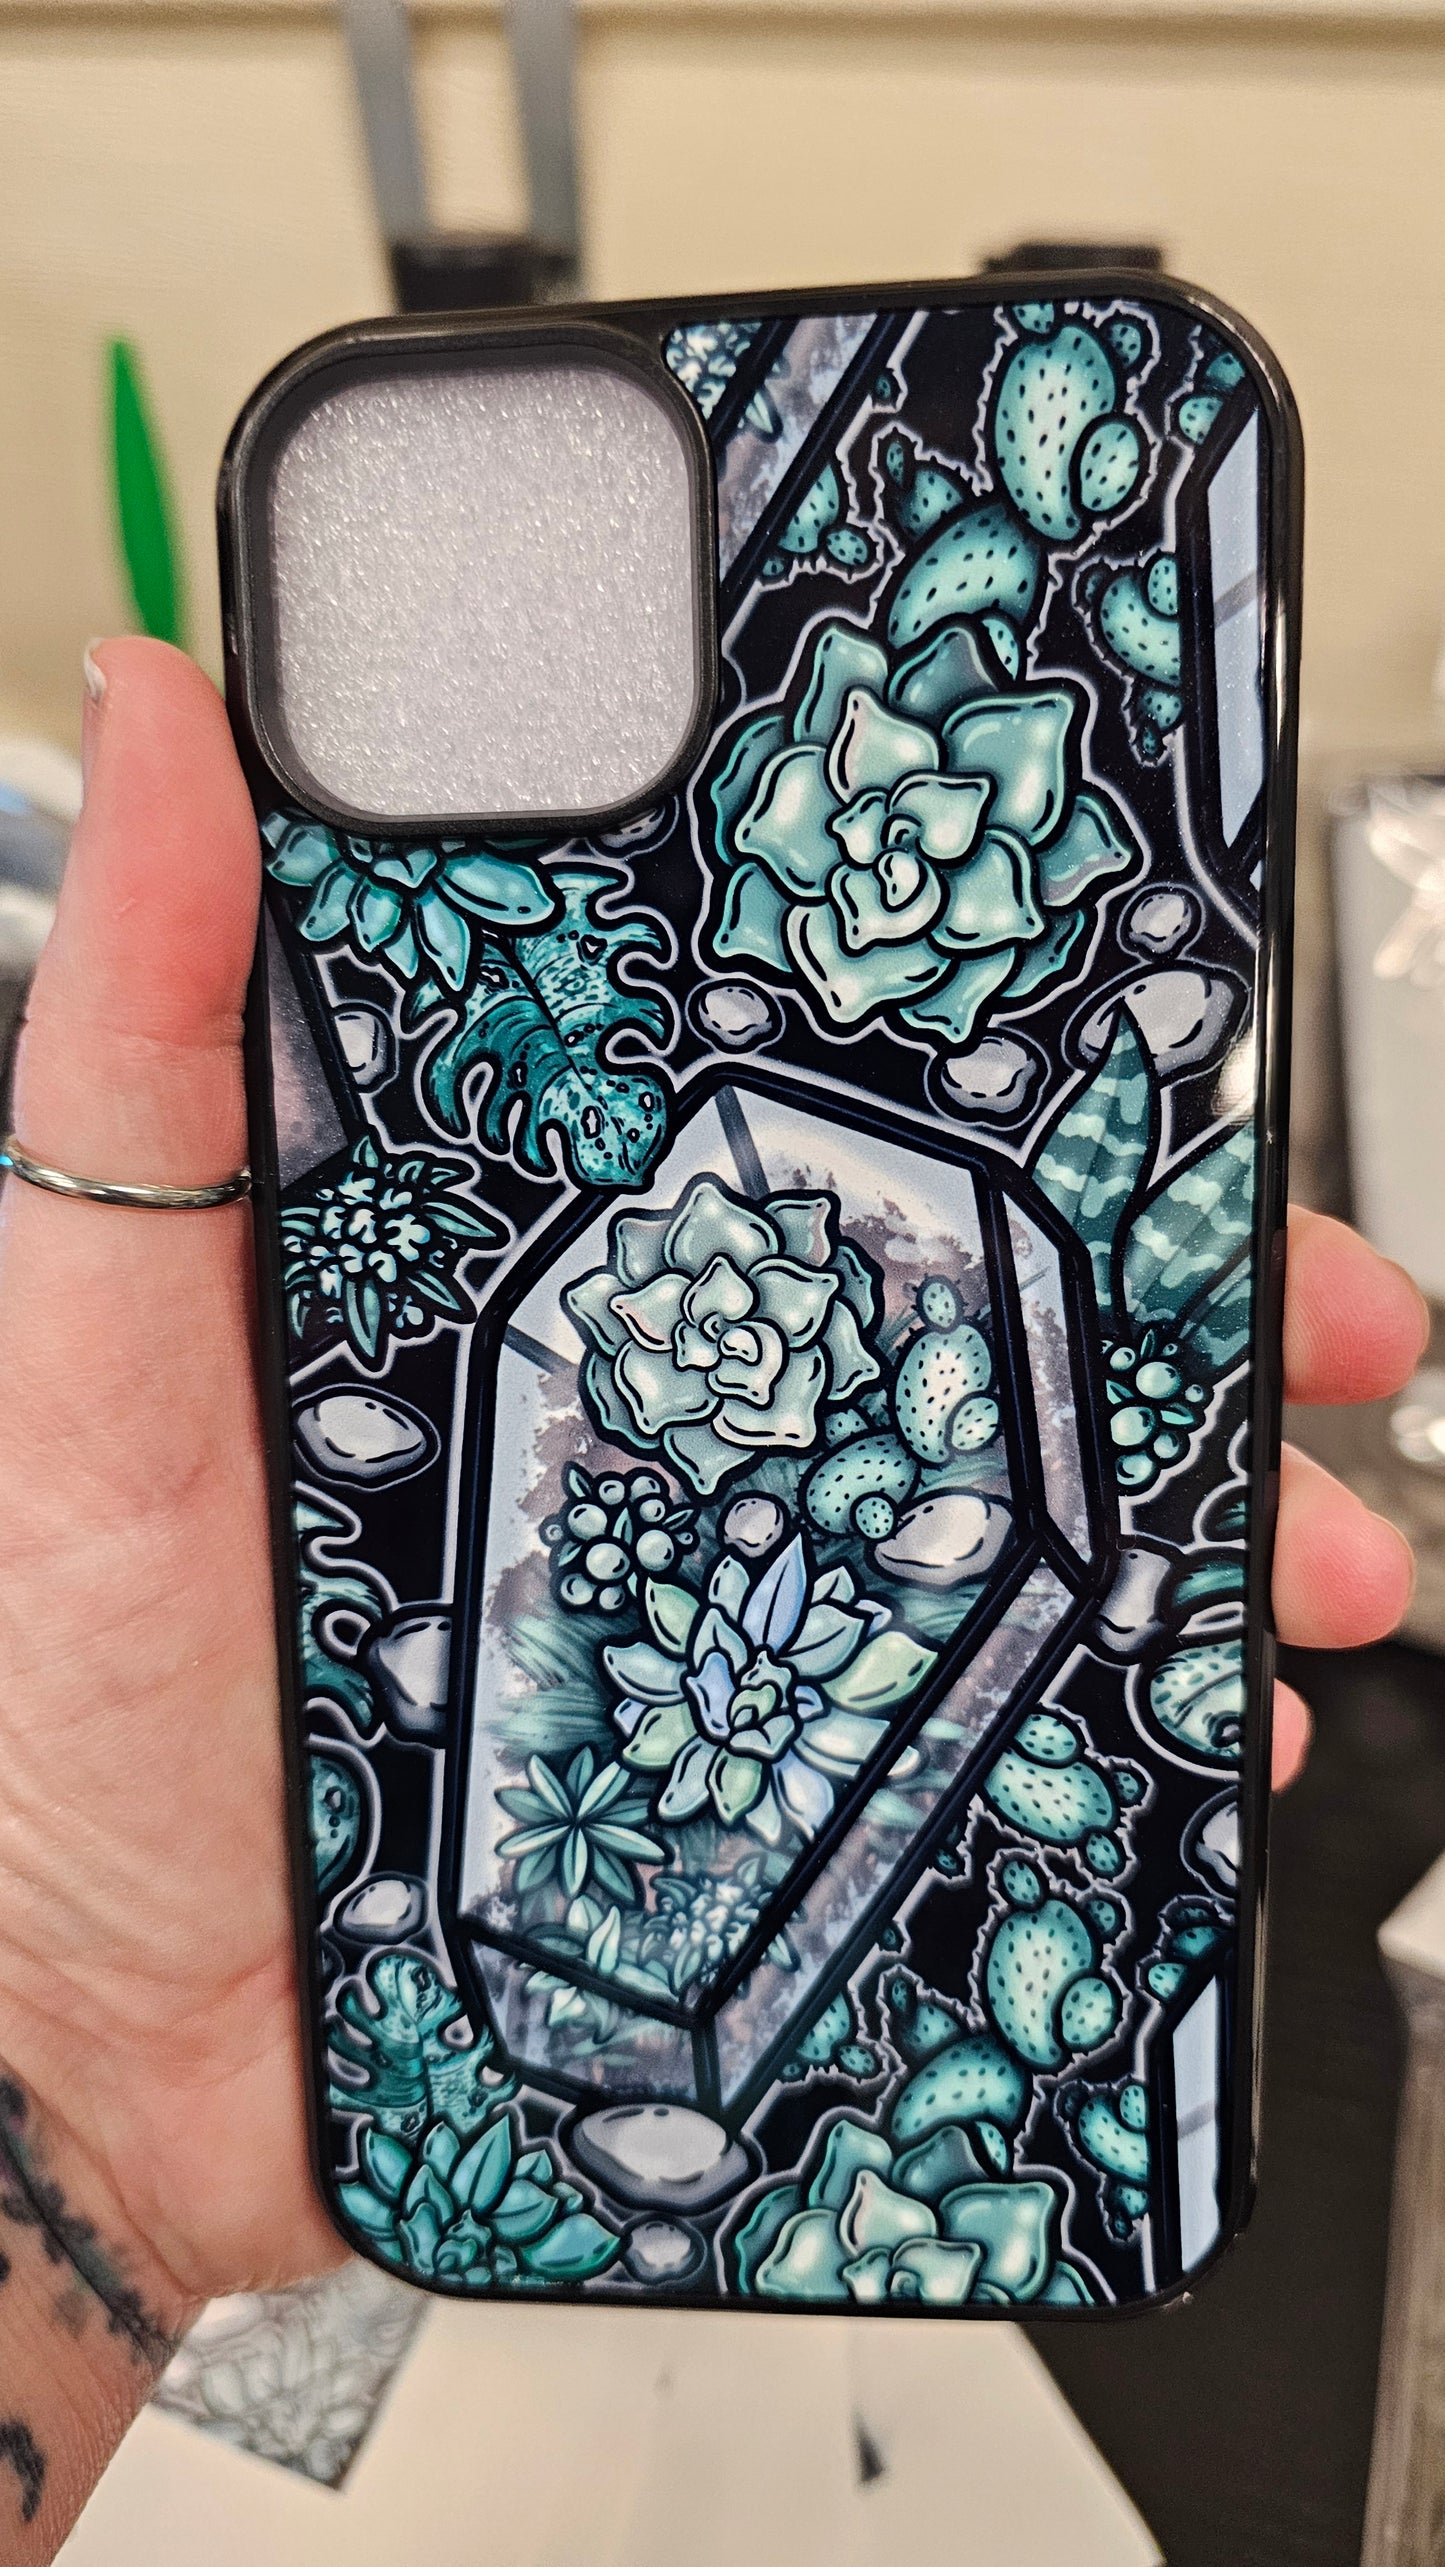 Plant Witch Phone case